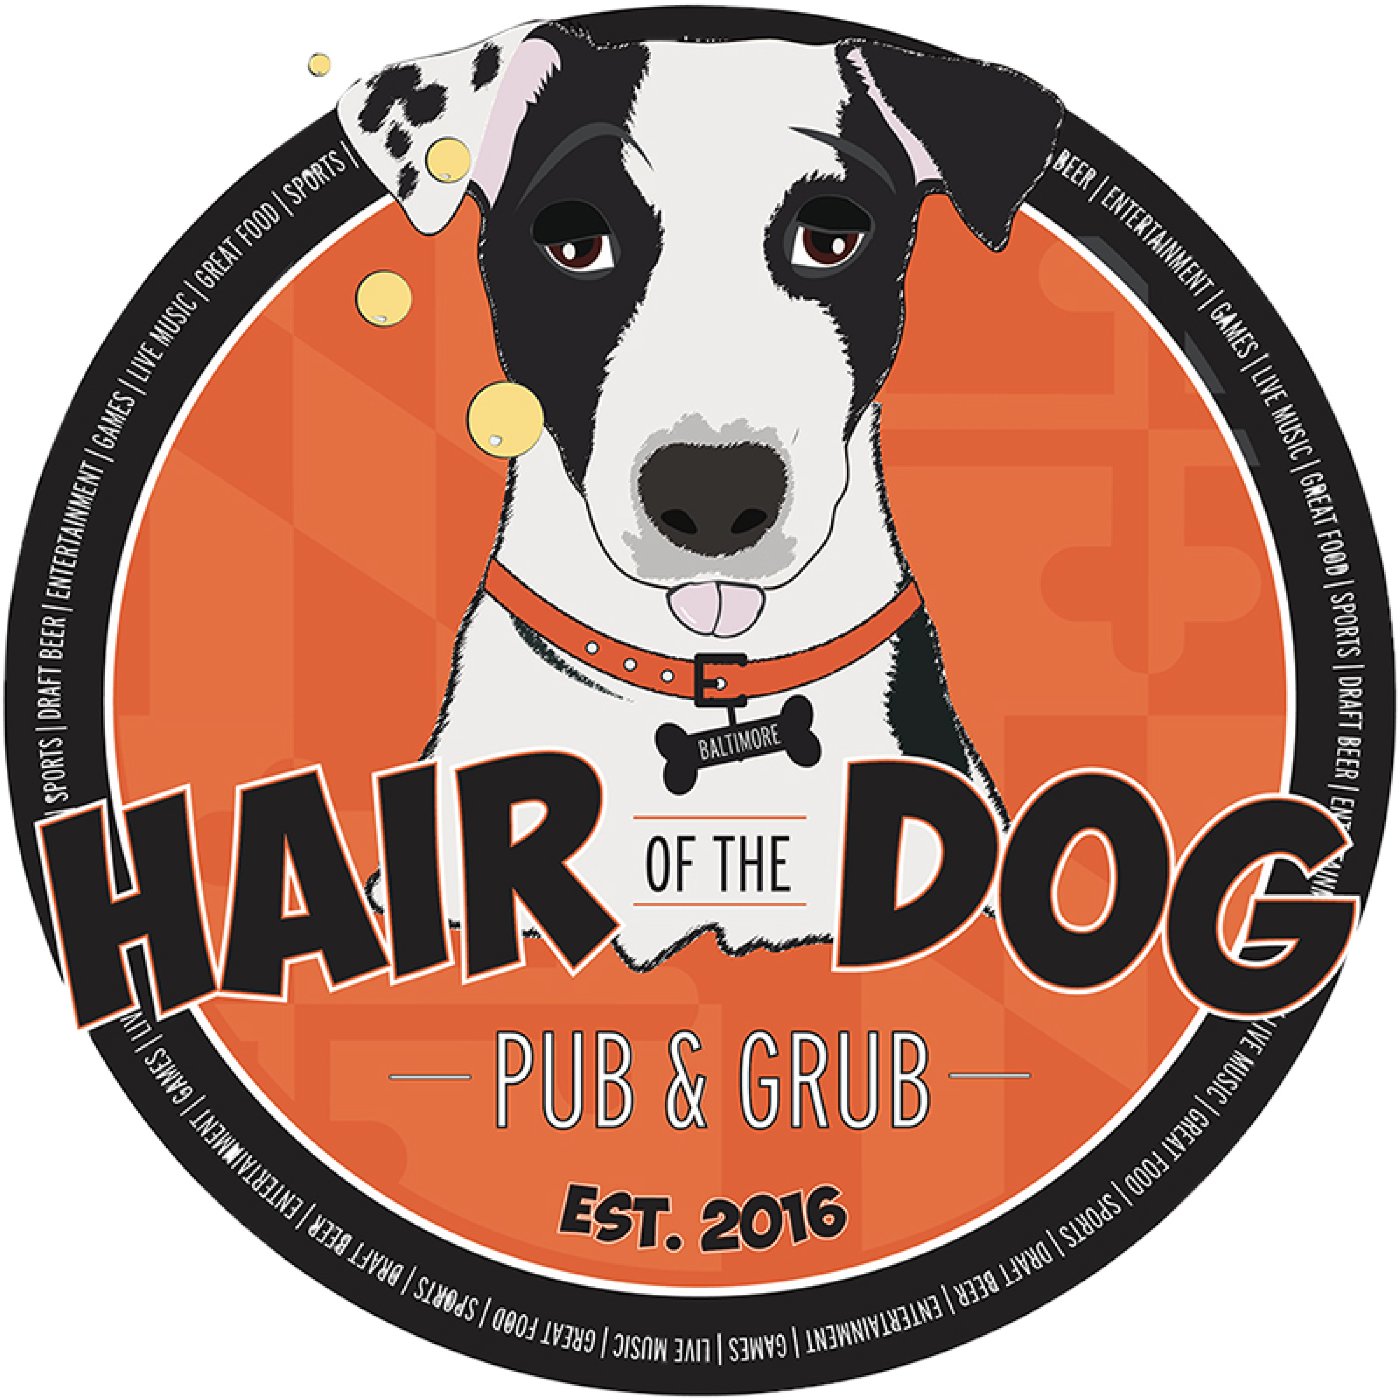 Hair of the Dog Baltimore